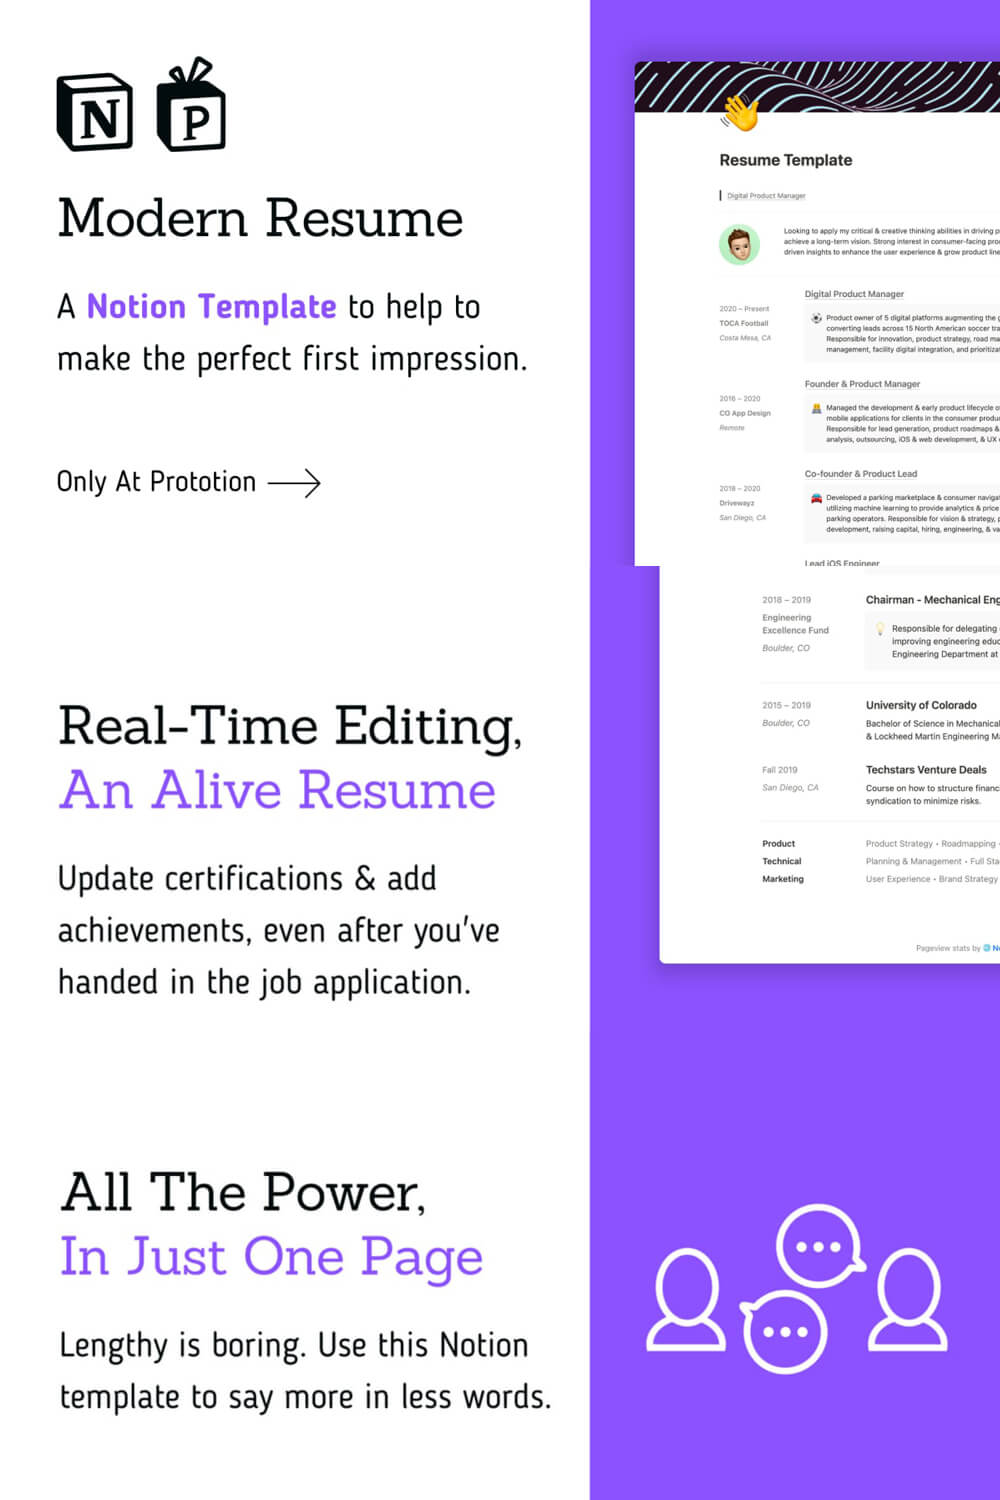 Modern Resume, a notion template to help to make the perfect first impression.